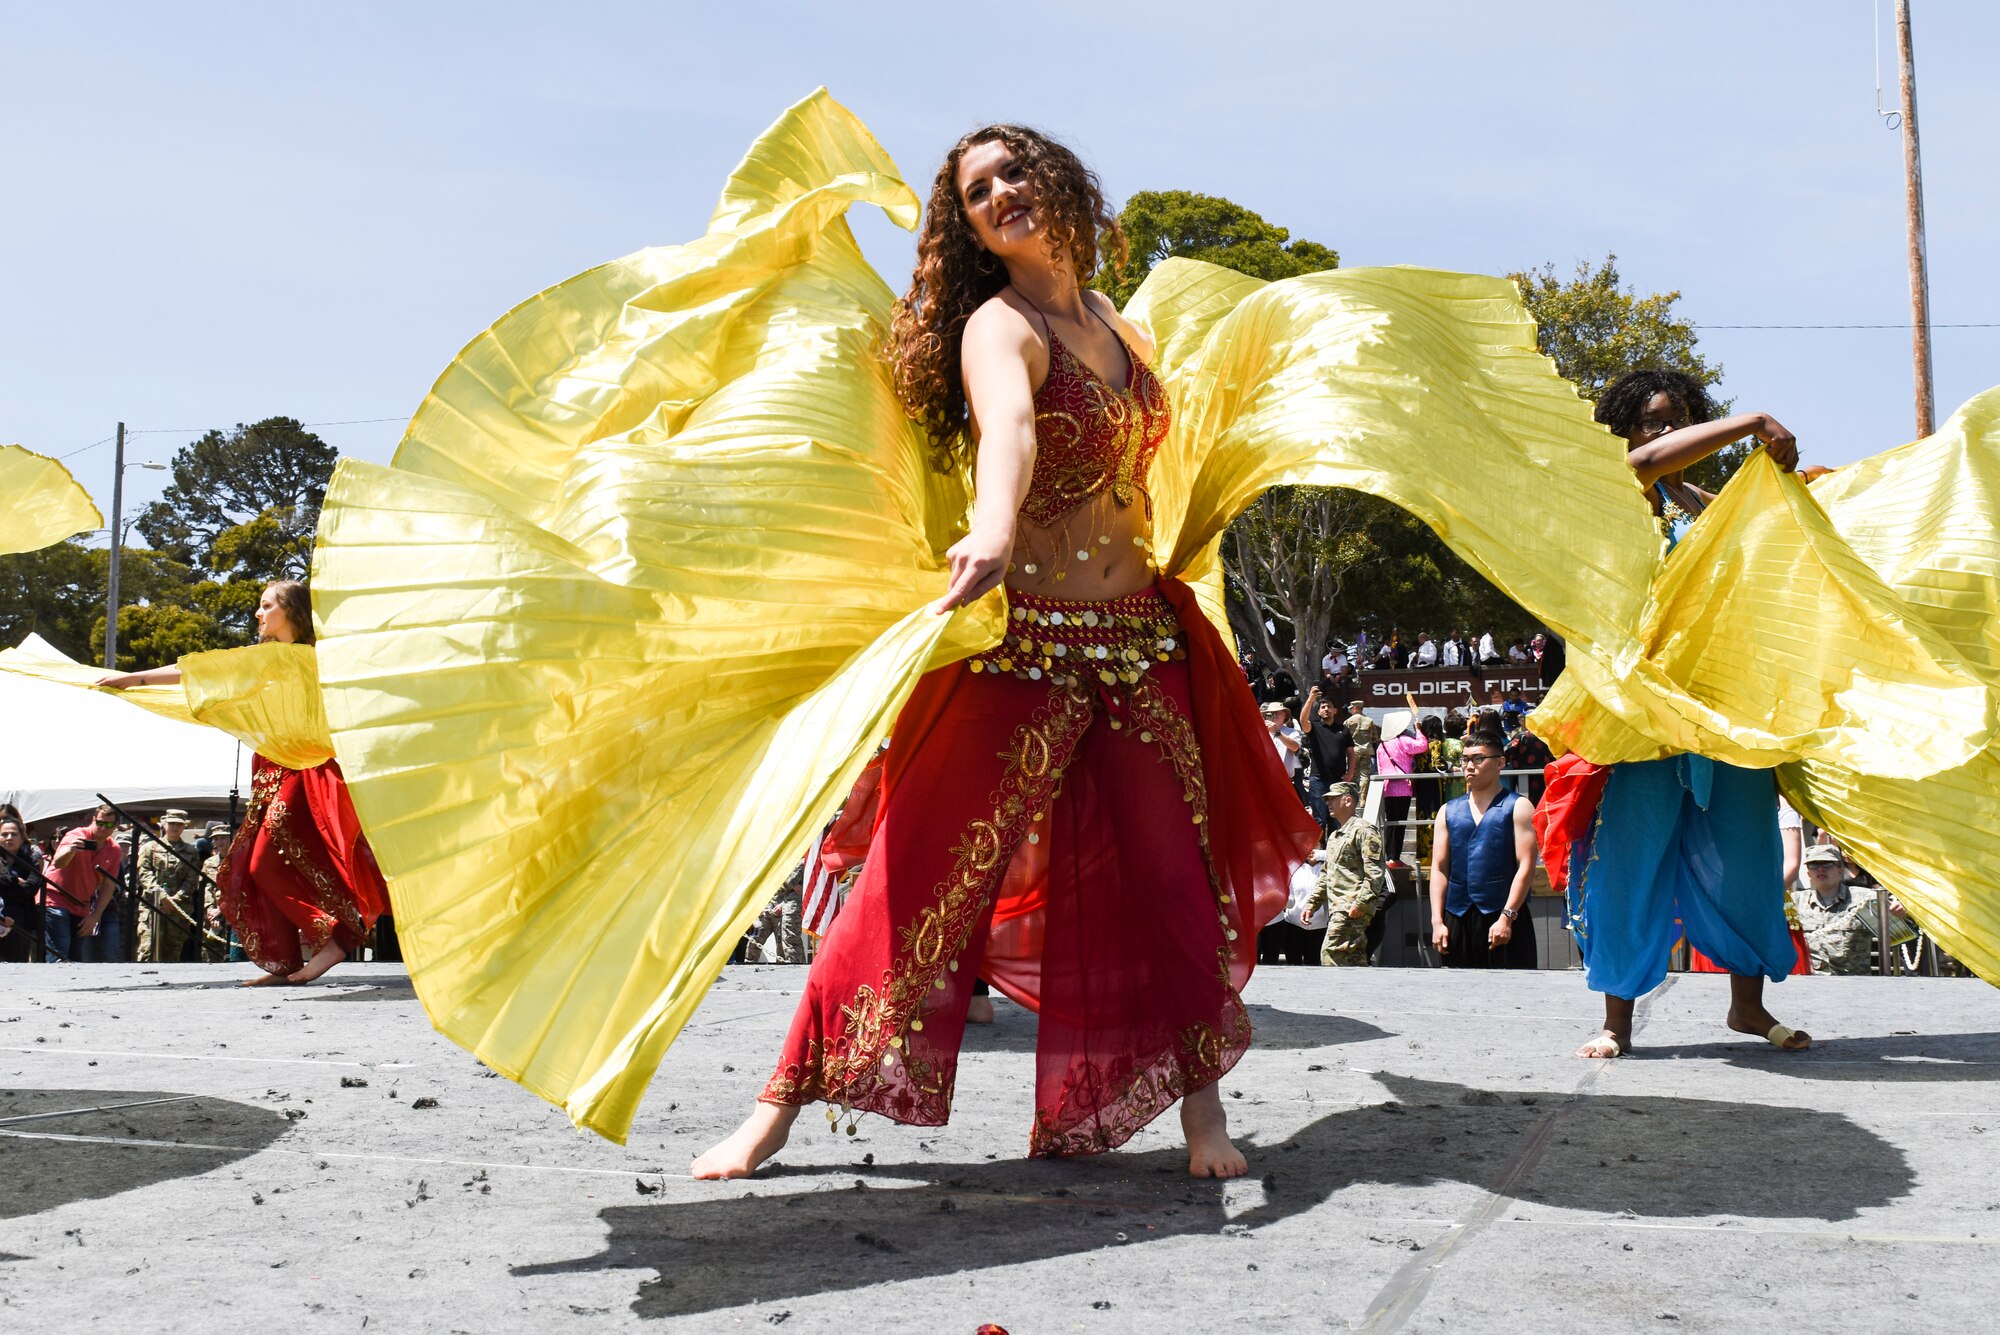 Airman 1st Class Neva Hendry, 311th Training Squadron trainee, performs the Levantine belly dance during the Defense Language Institute Foreign Language Center Language Day at the Presideo of Monterey, California, May 11, 2018. Hendry choreographed and taught the dance practicing for a month and a half before Language Day.